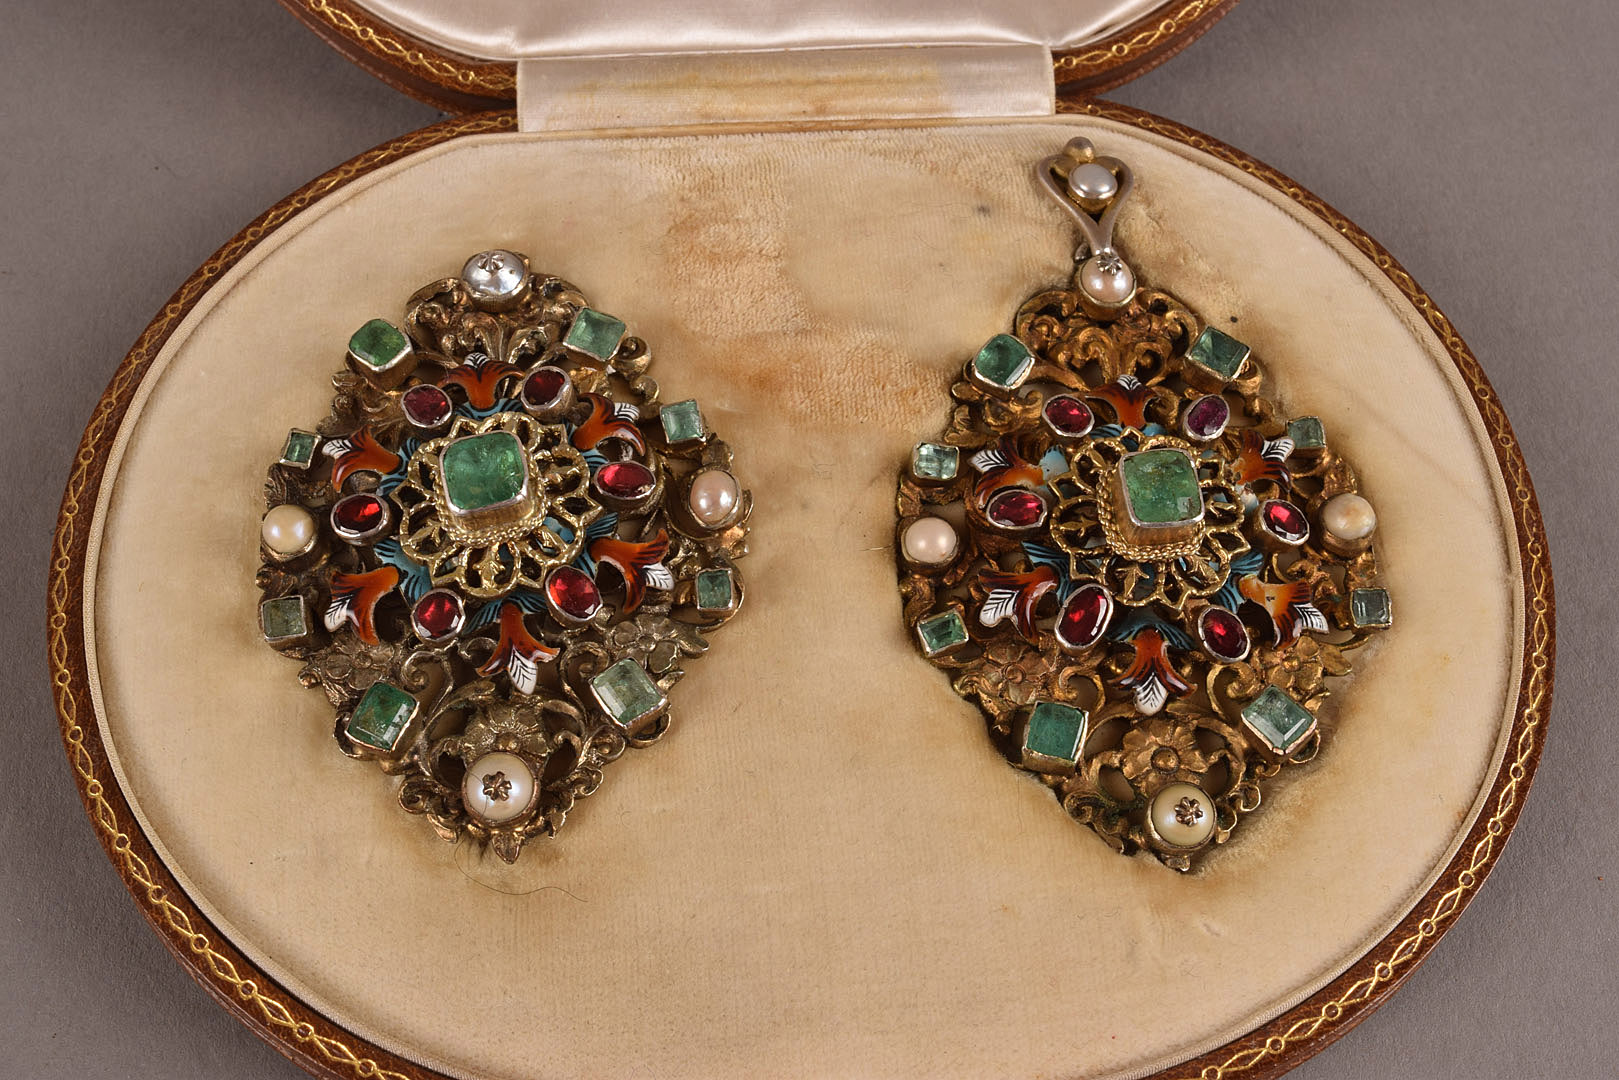 A fine Edwardian period Austro-Hungarian silver gilt enamelled and gem set pendant and brooch suite, - Image 2 of 3